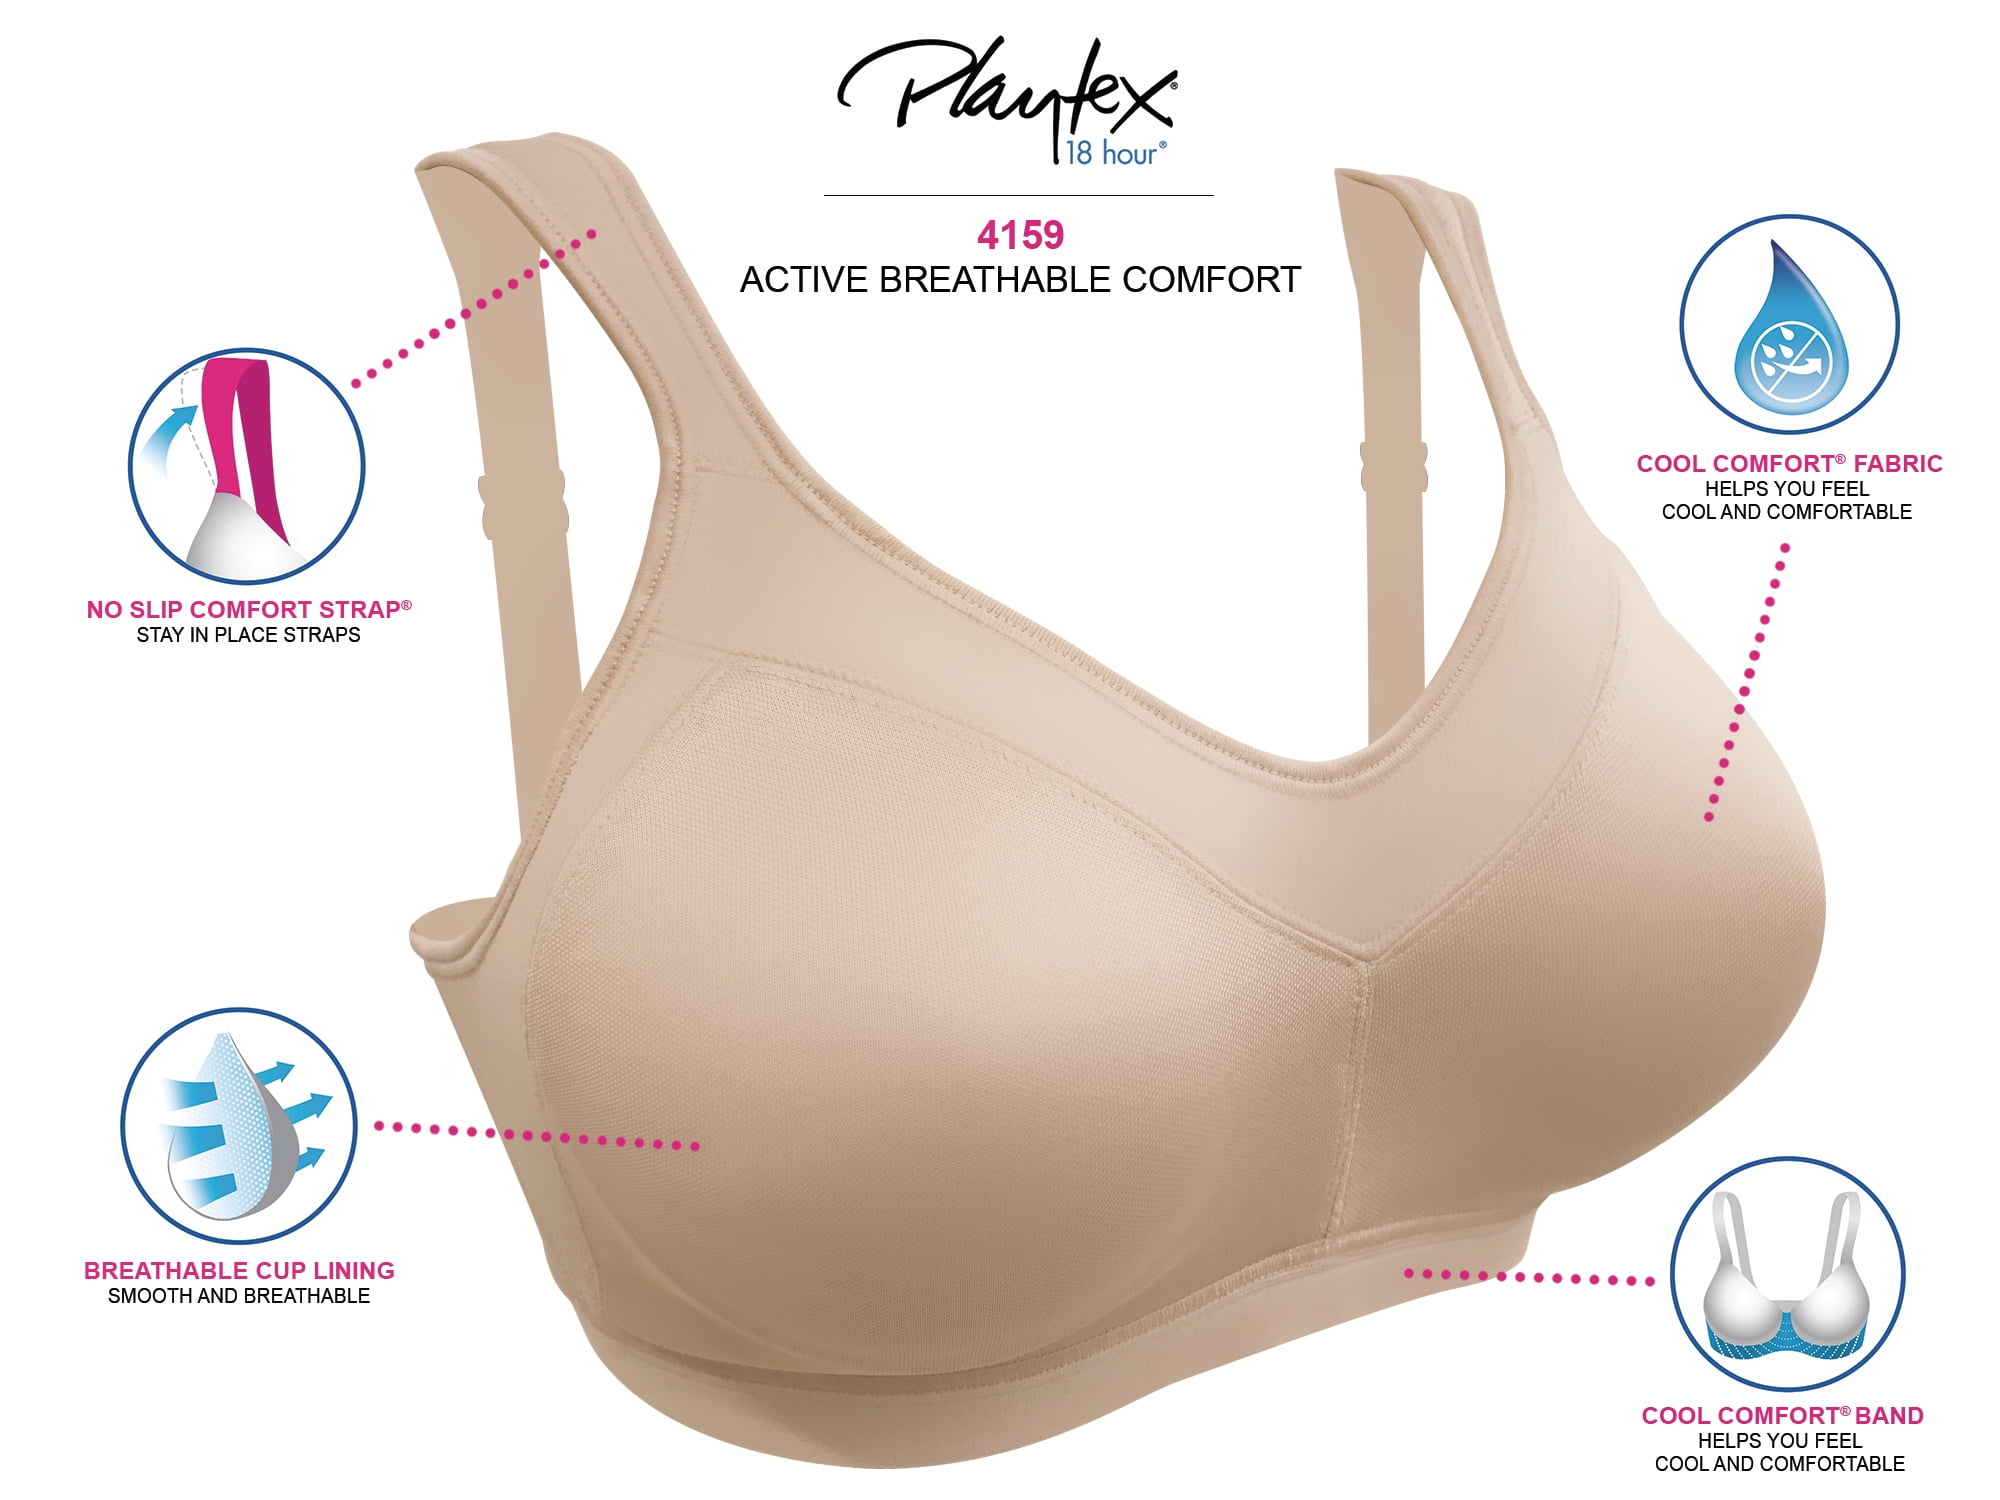 Playtex 18 Hour Wirefree Bra Active Breathable Comfort Seamless